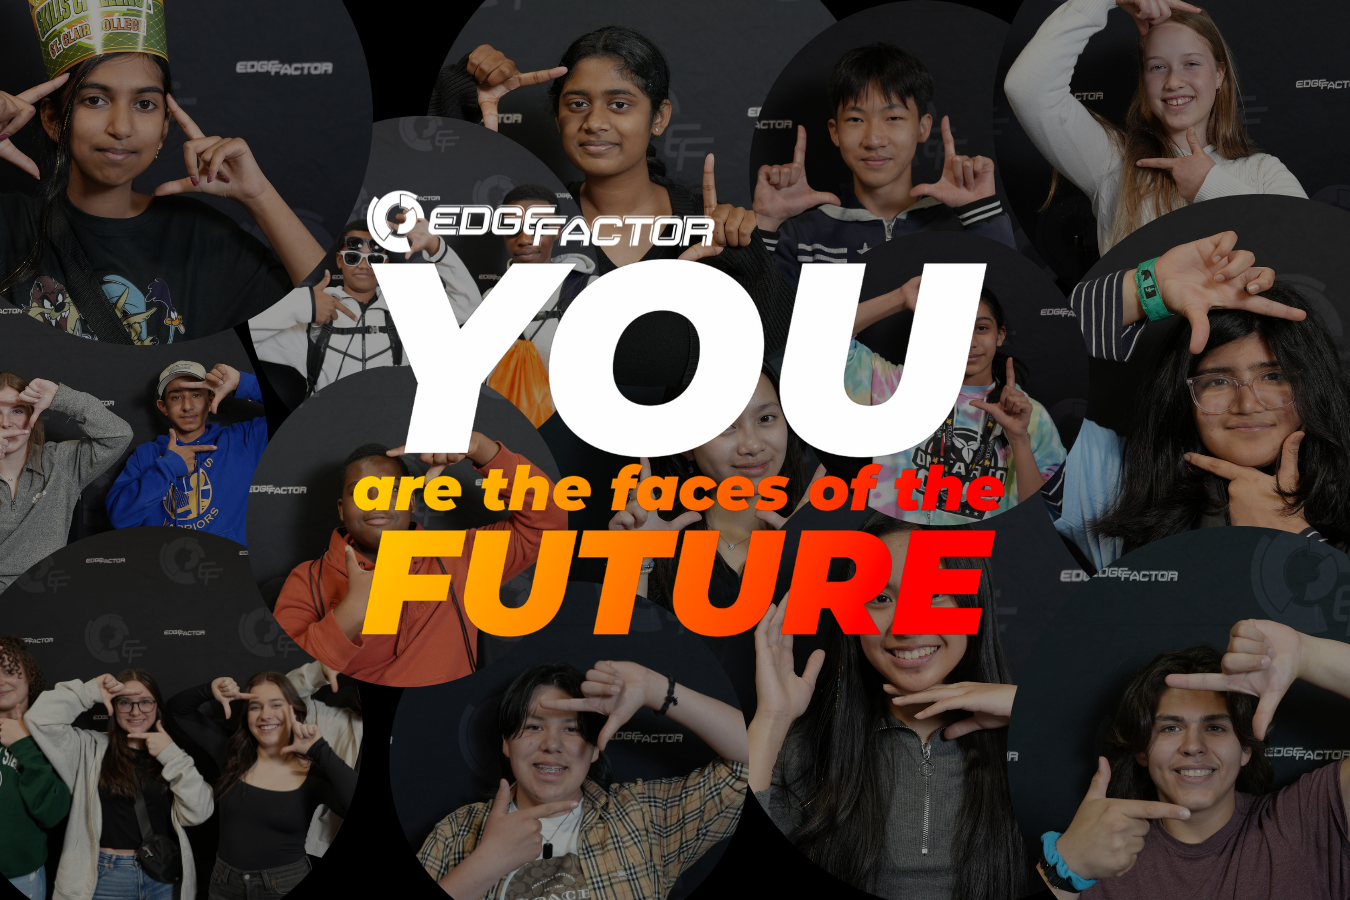 A group of students framing their face with their hands with the Edge Factor logo Faces of the Future